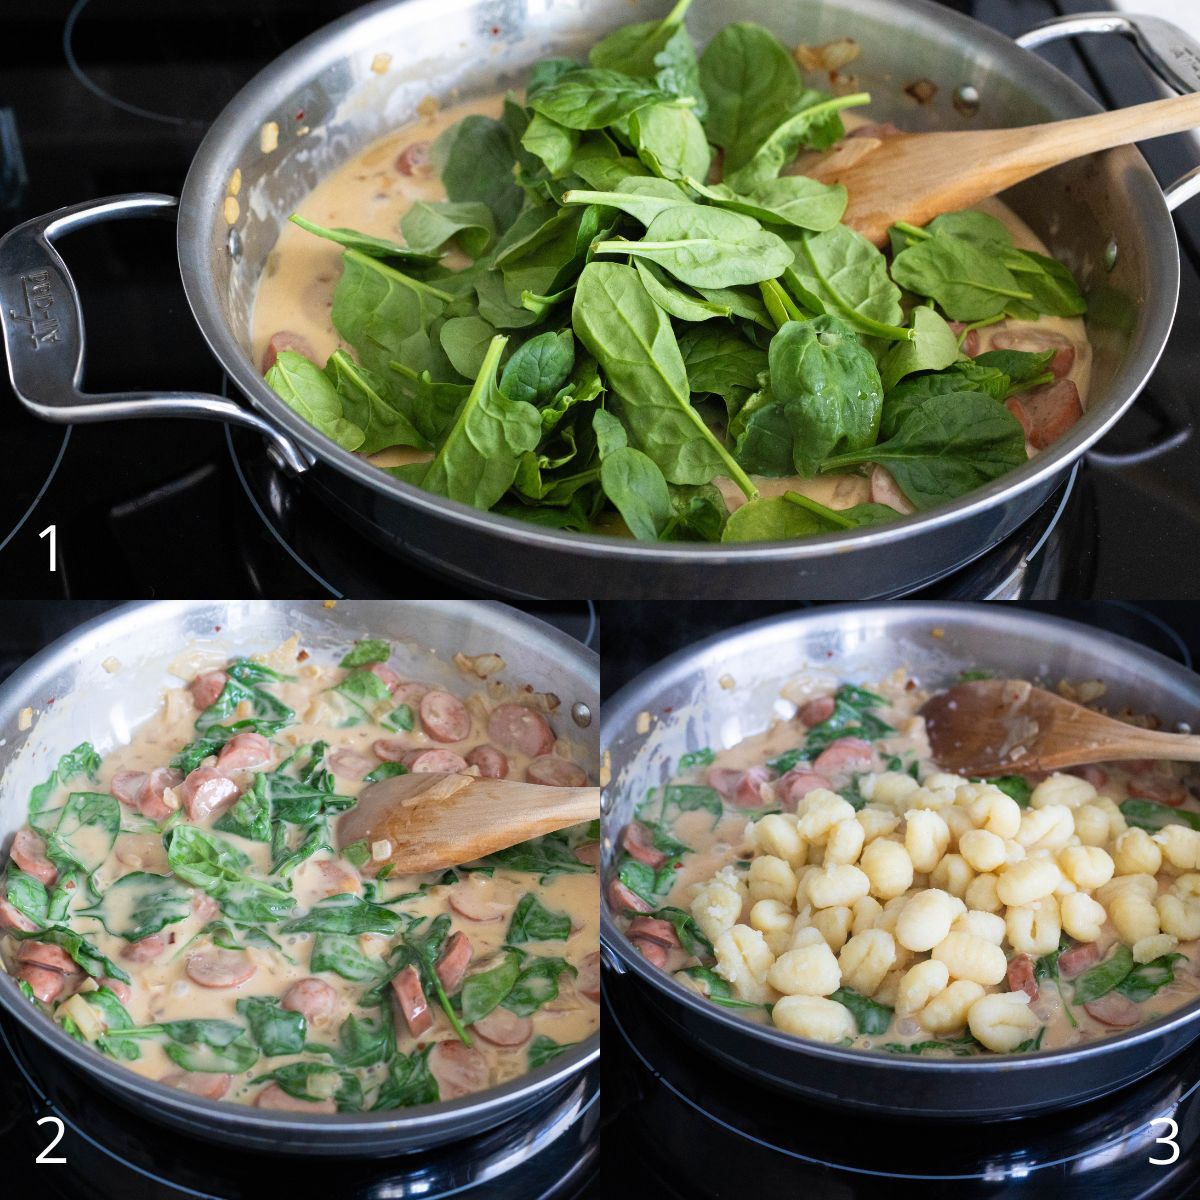 Step by step photos show that the baby spinach has been added to the skillet with the cream sauce. Once it is wilted down, the boiled gnocchi are tossed in the sauce.